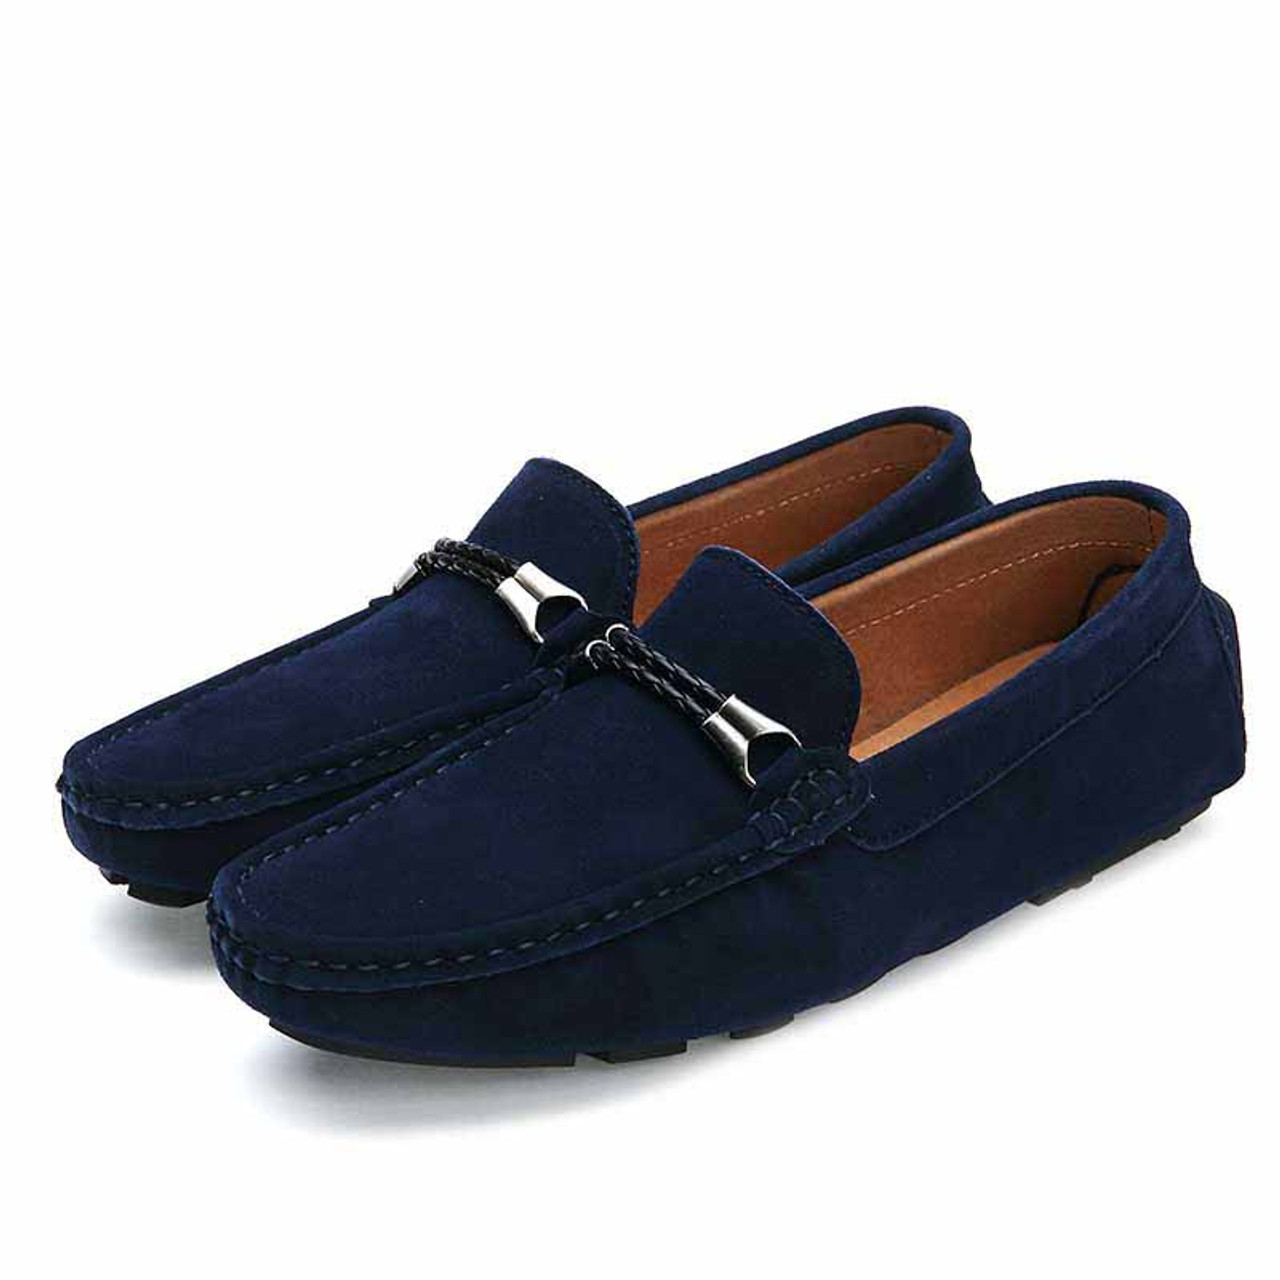 Blue twin rope leather slip on shoe loafer | Mens shoes online 1232MS